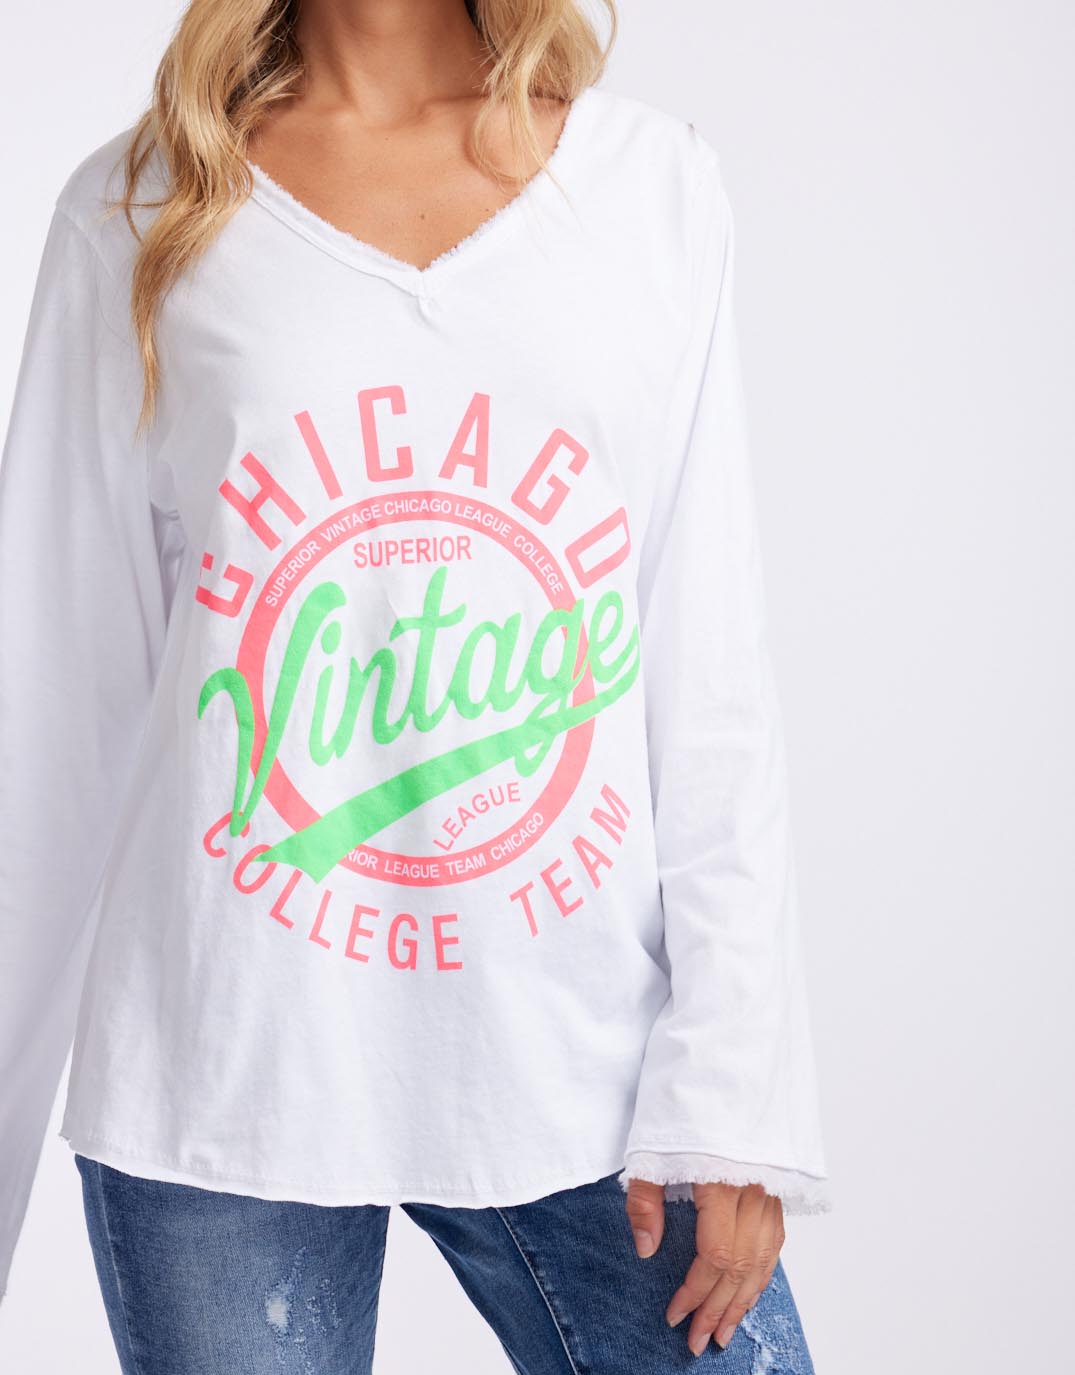 italian-star-chicago-long-sleeve-top-white-womens-clothing